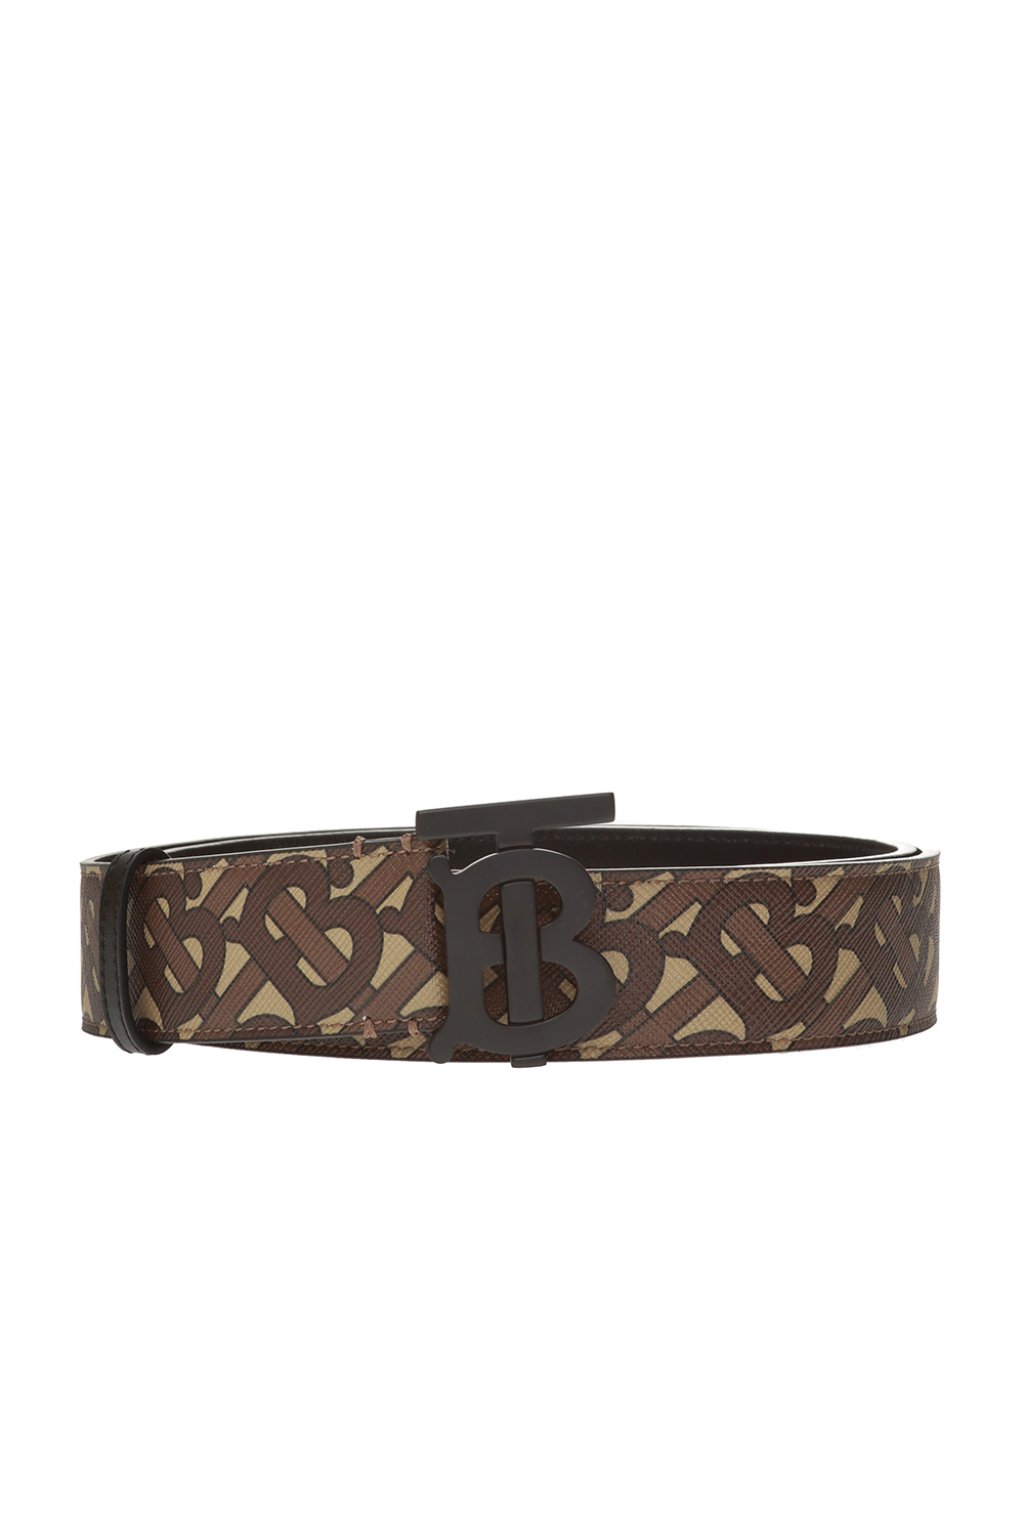 Burberry Bridle Brown Monogram Coated Canvas TB Buckle Belt S Burberry